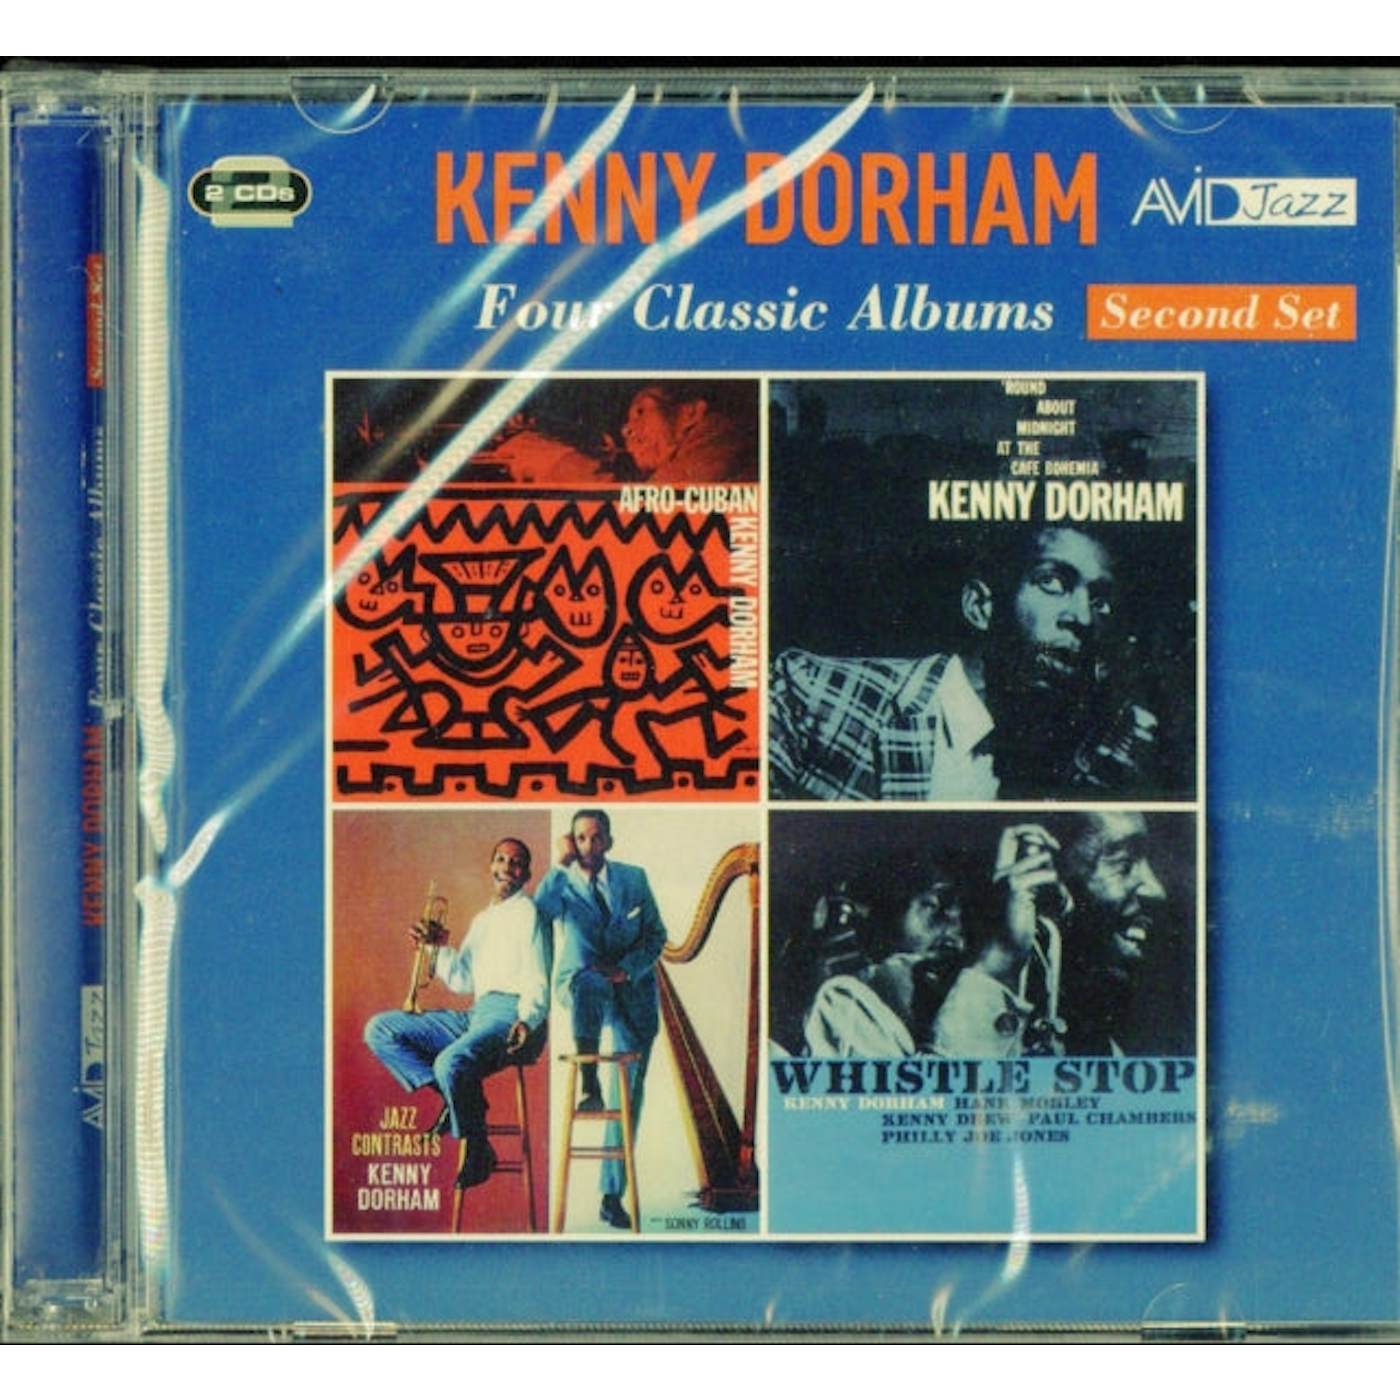 Kenny Dorham CD - Four Classic Albums (Afro-Cuban / 'Round About Midnight At The Cafe Bohemia / Jazz Contrasts / Whistle Stop)